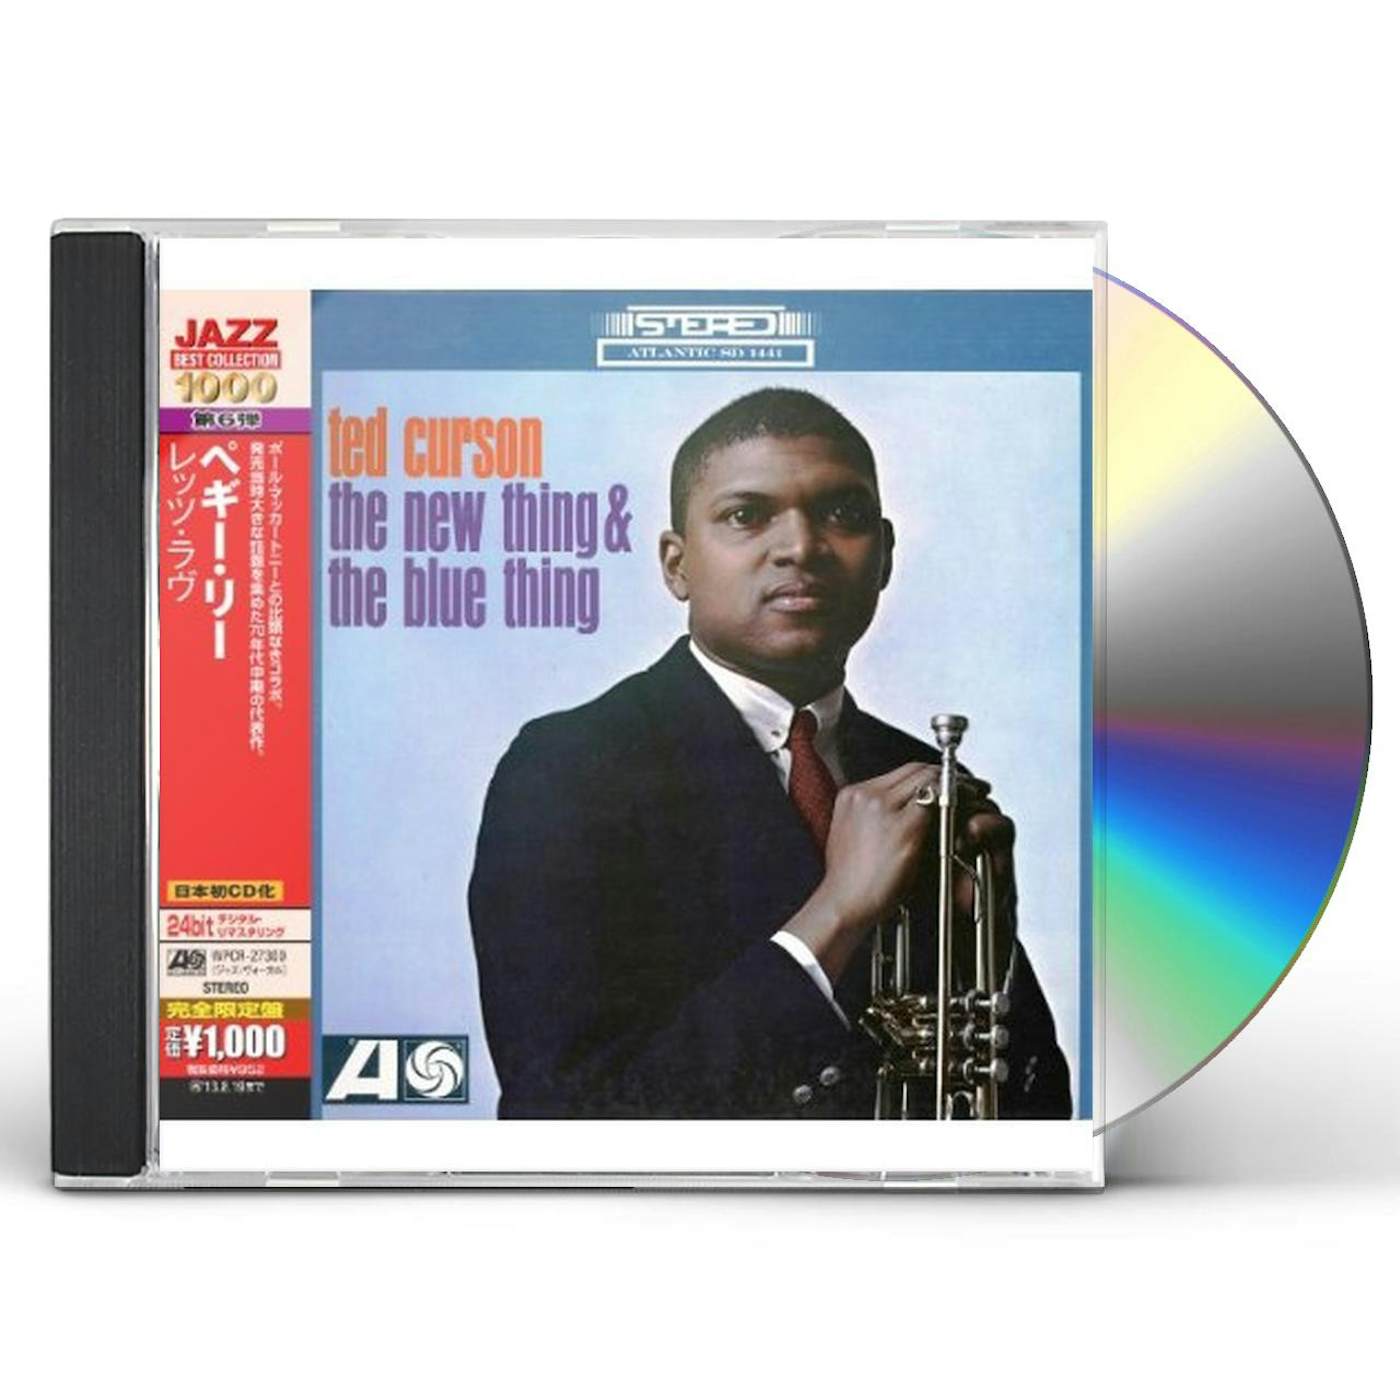 Ted Curson NEW THING & THE BLUE THING CD